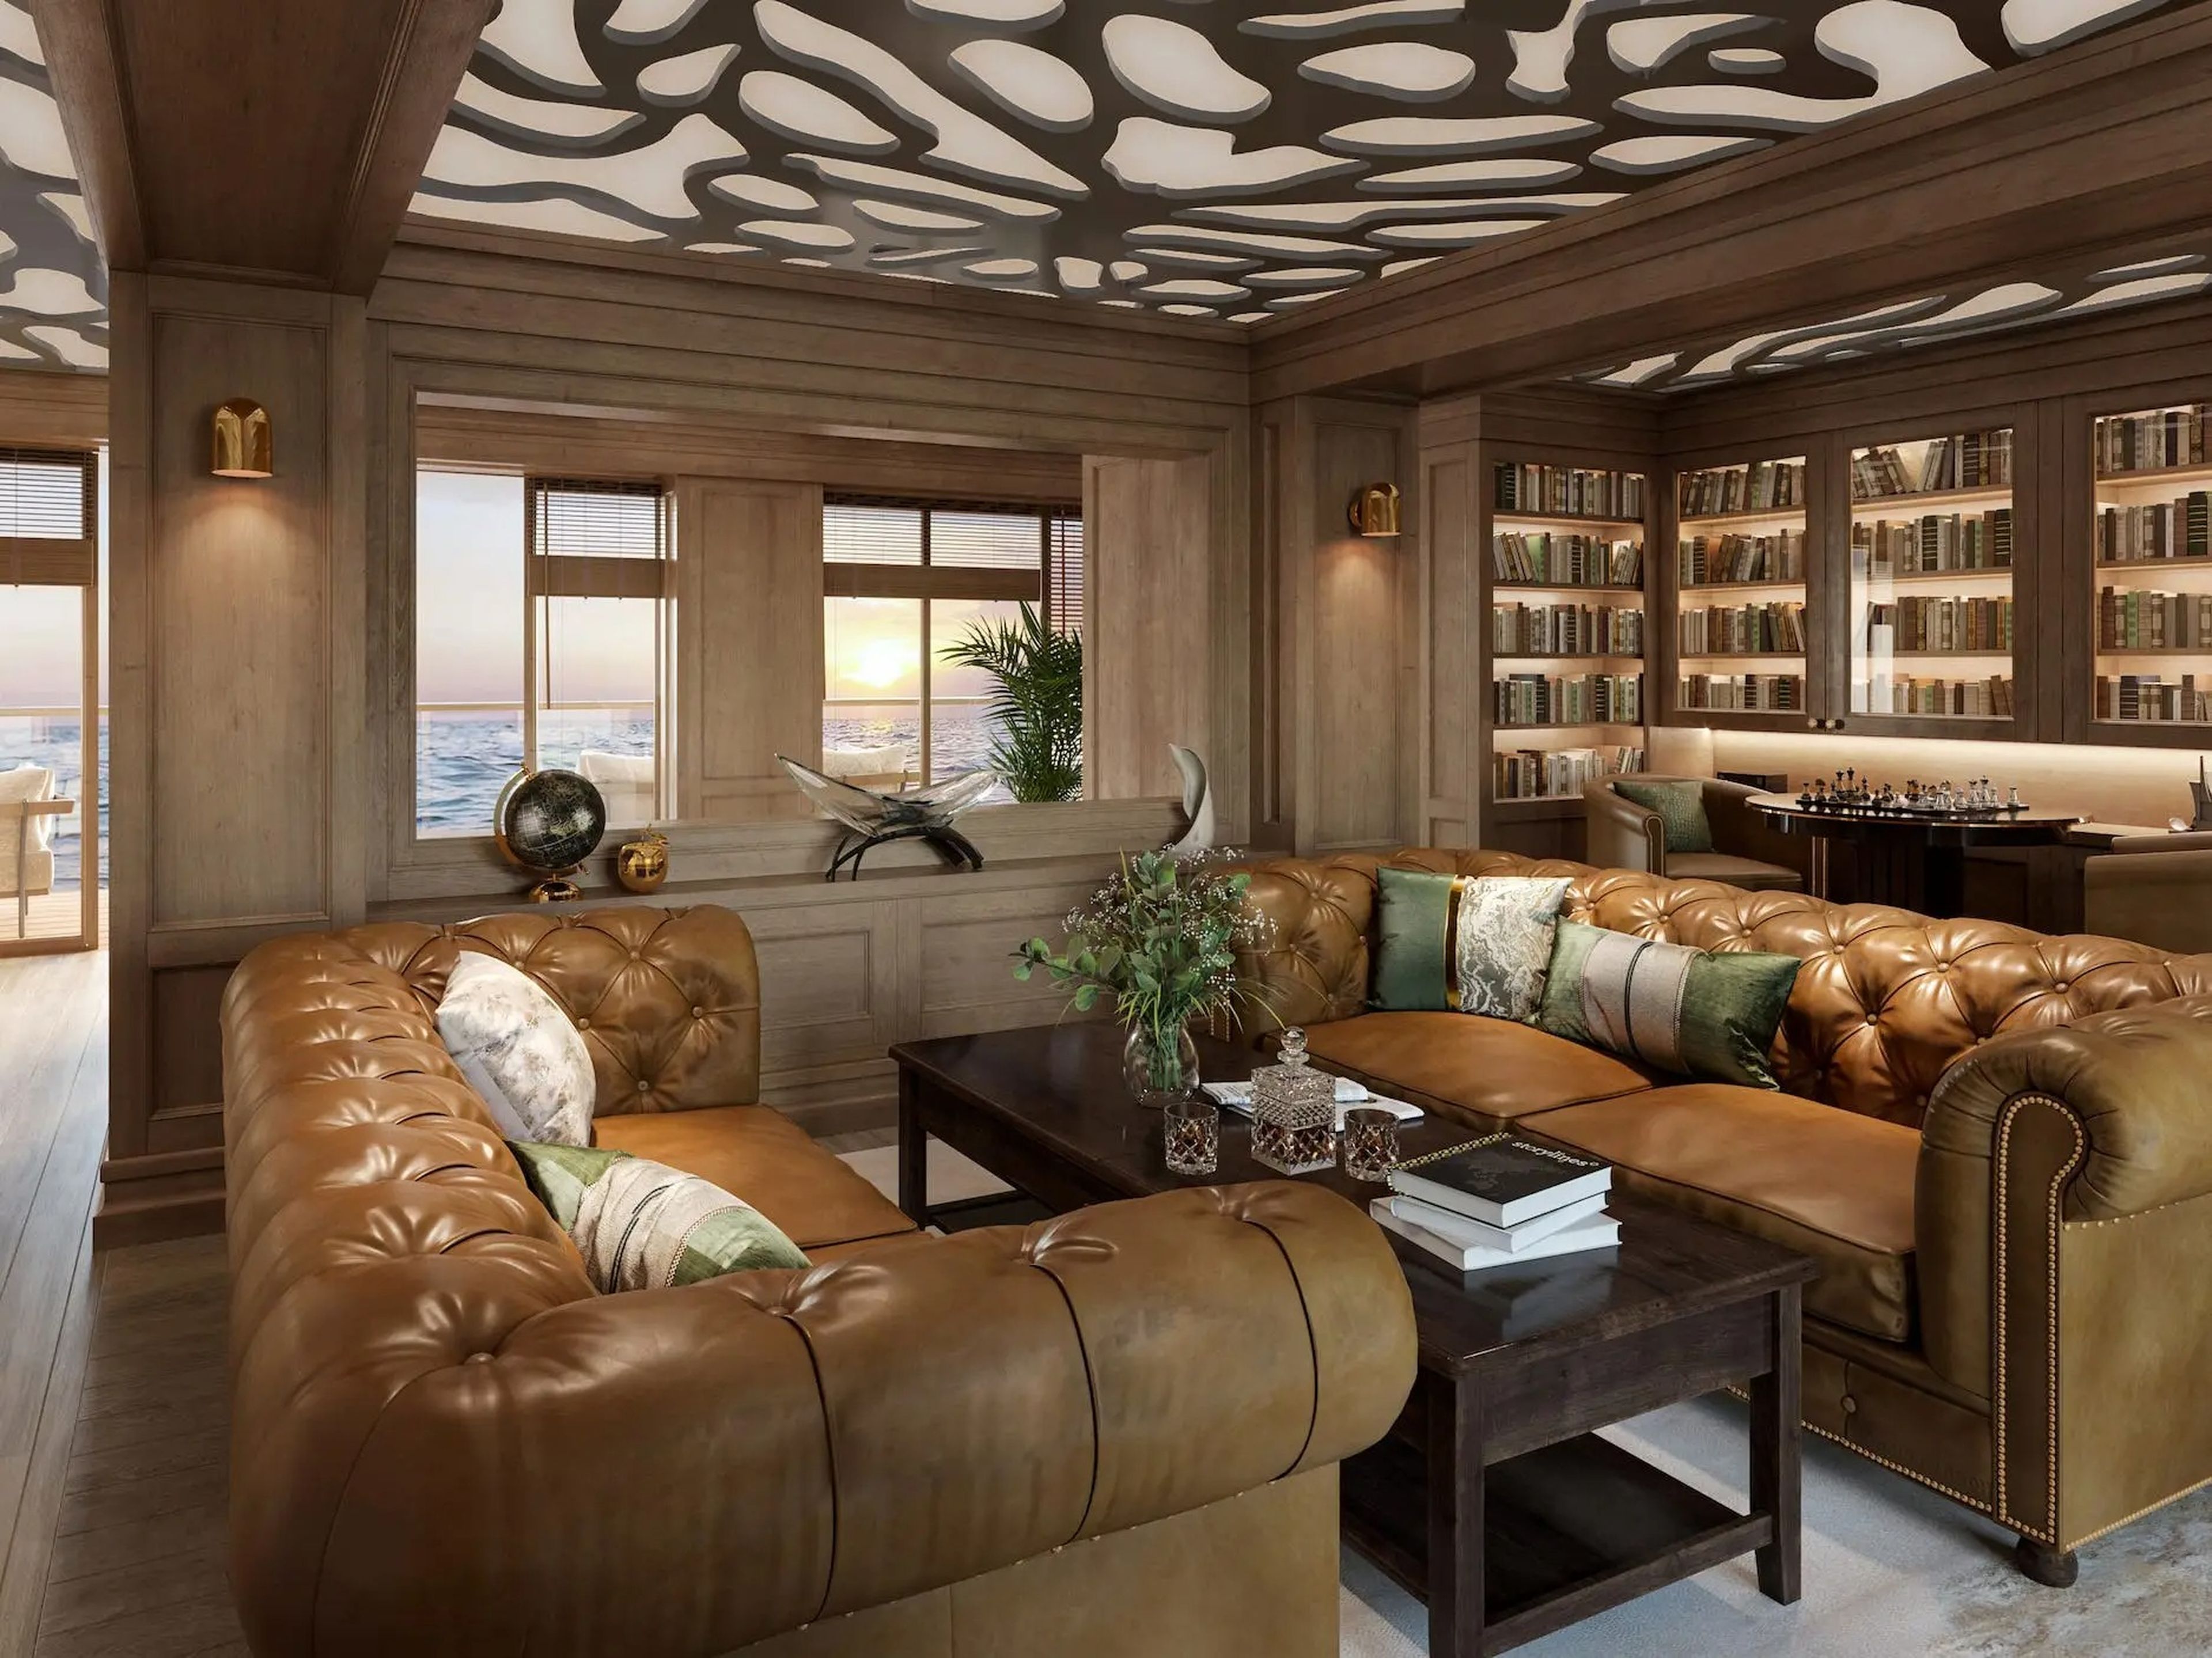 A rendering of the resident lounge in Storylines' MV Narrative cruise ship.